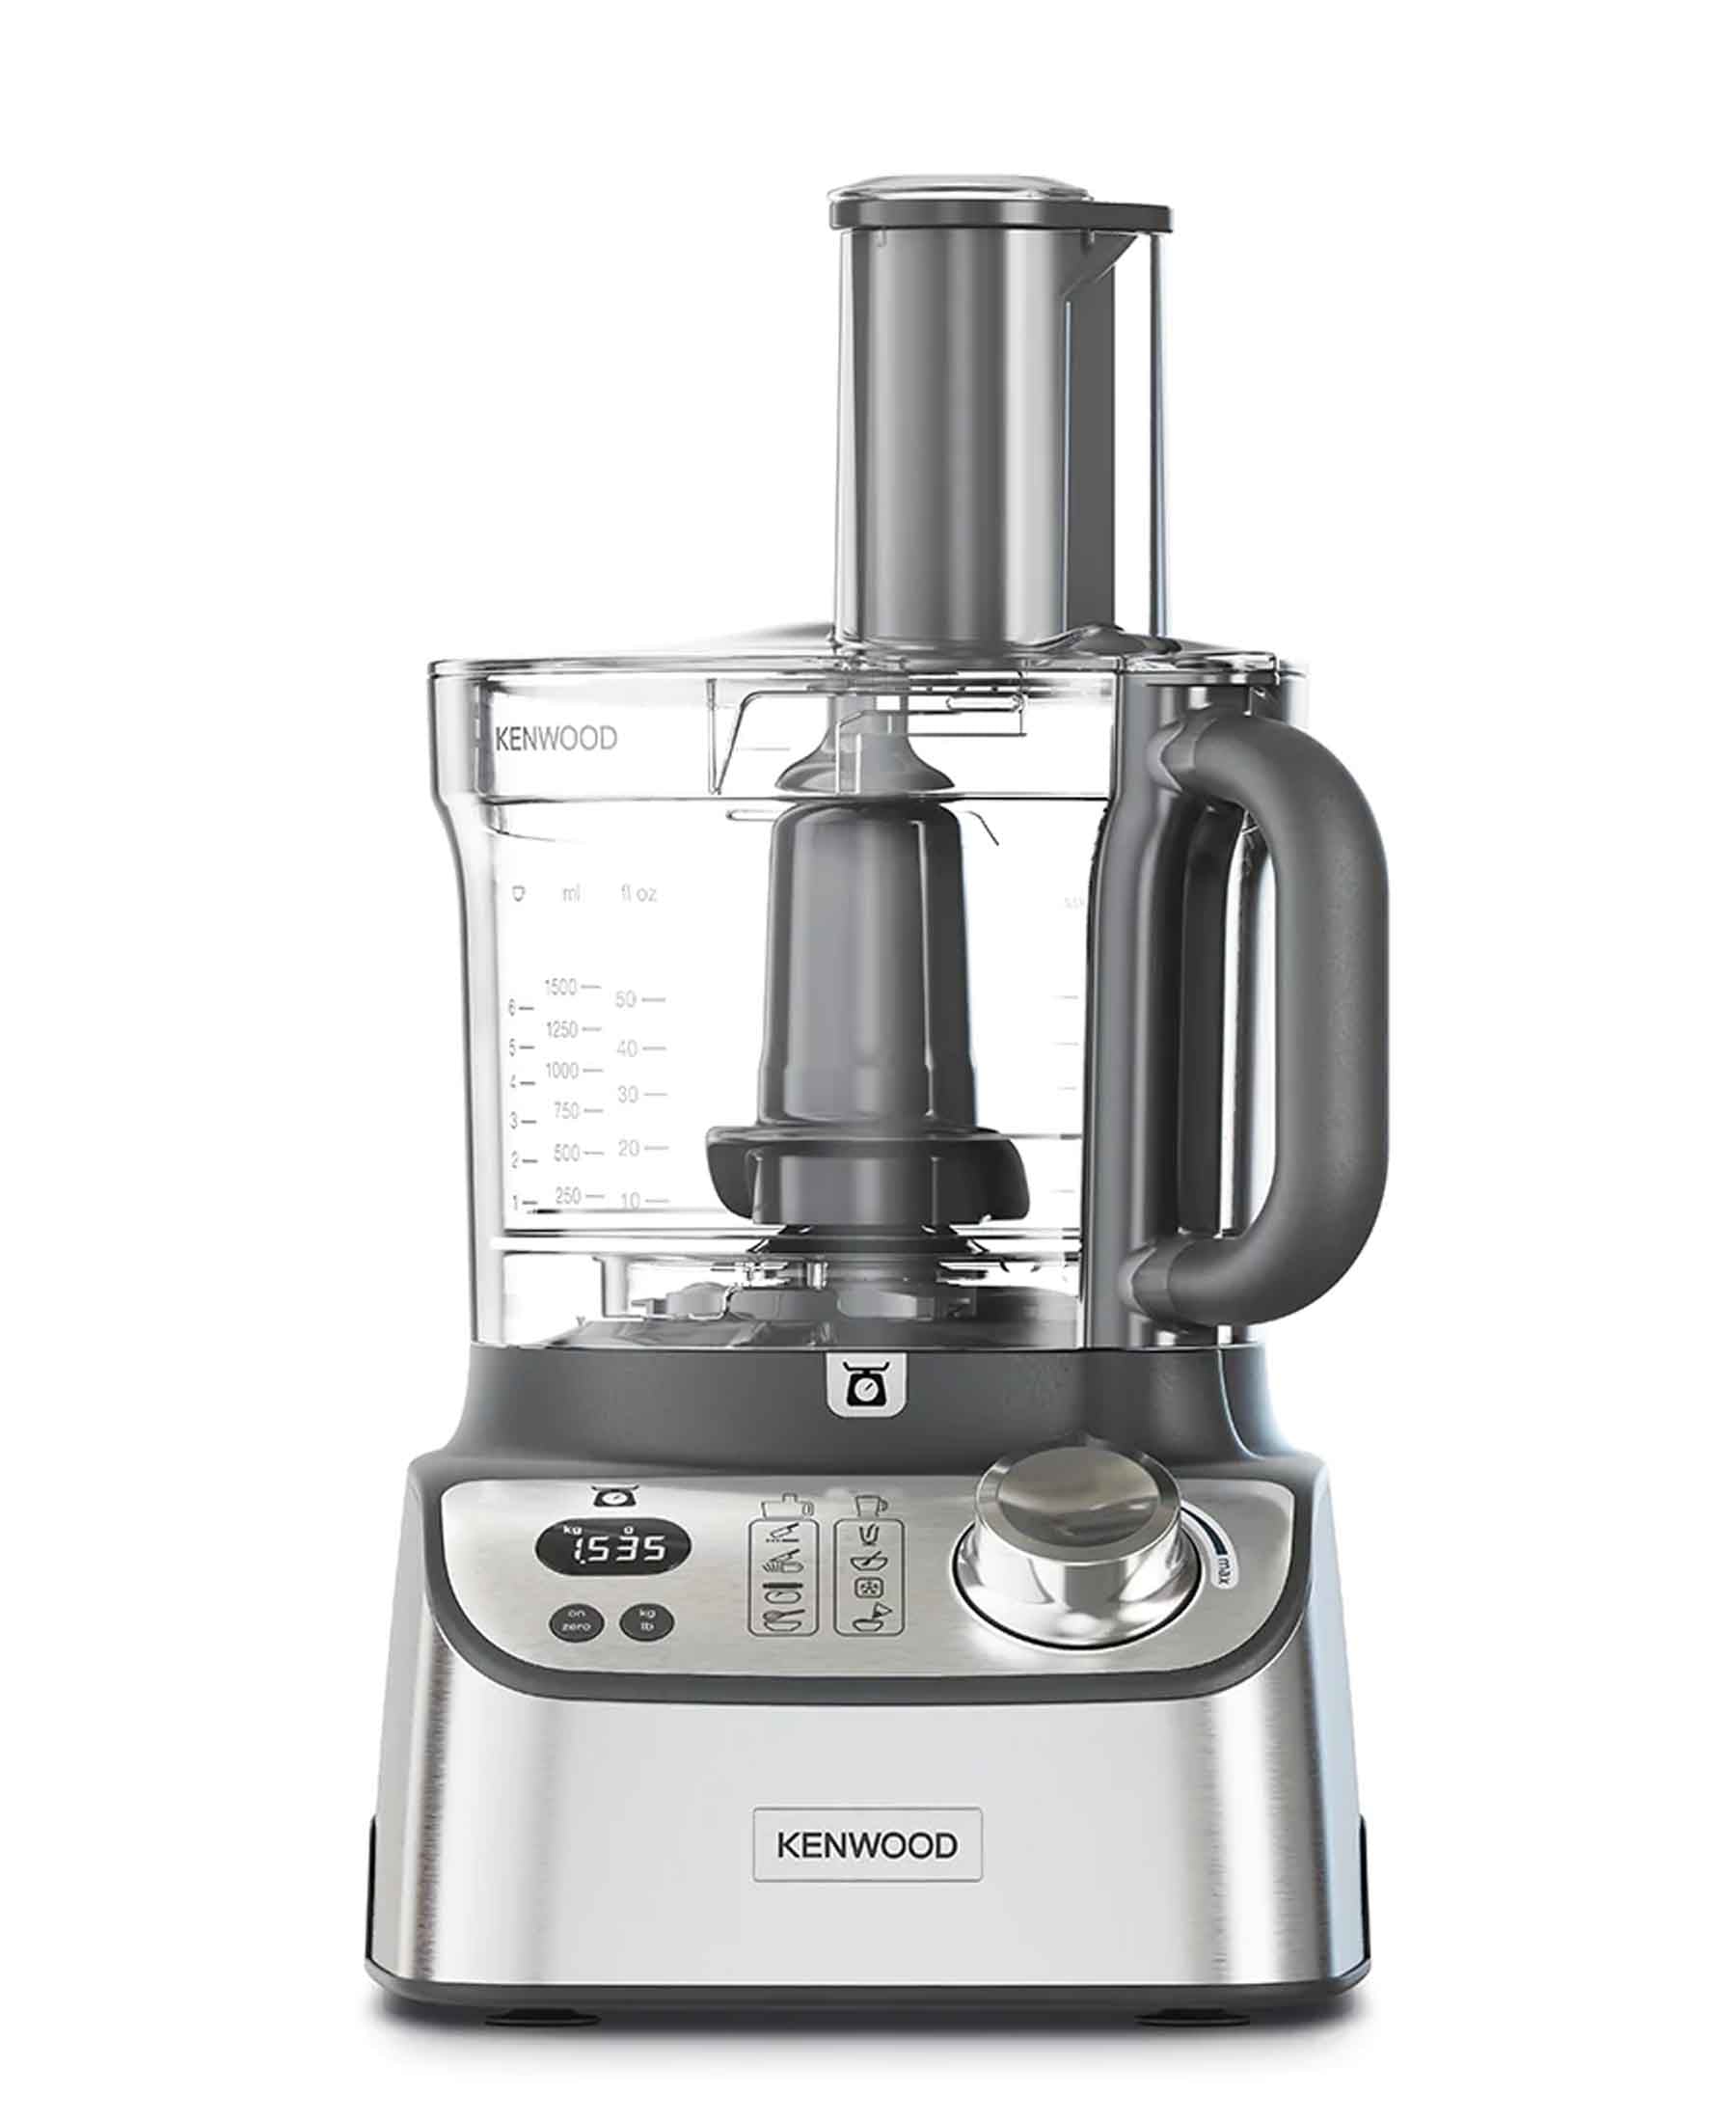 Kenwood Multipro Express Weigh+ Food Processor 3L - Silver